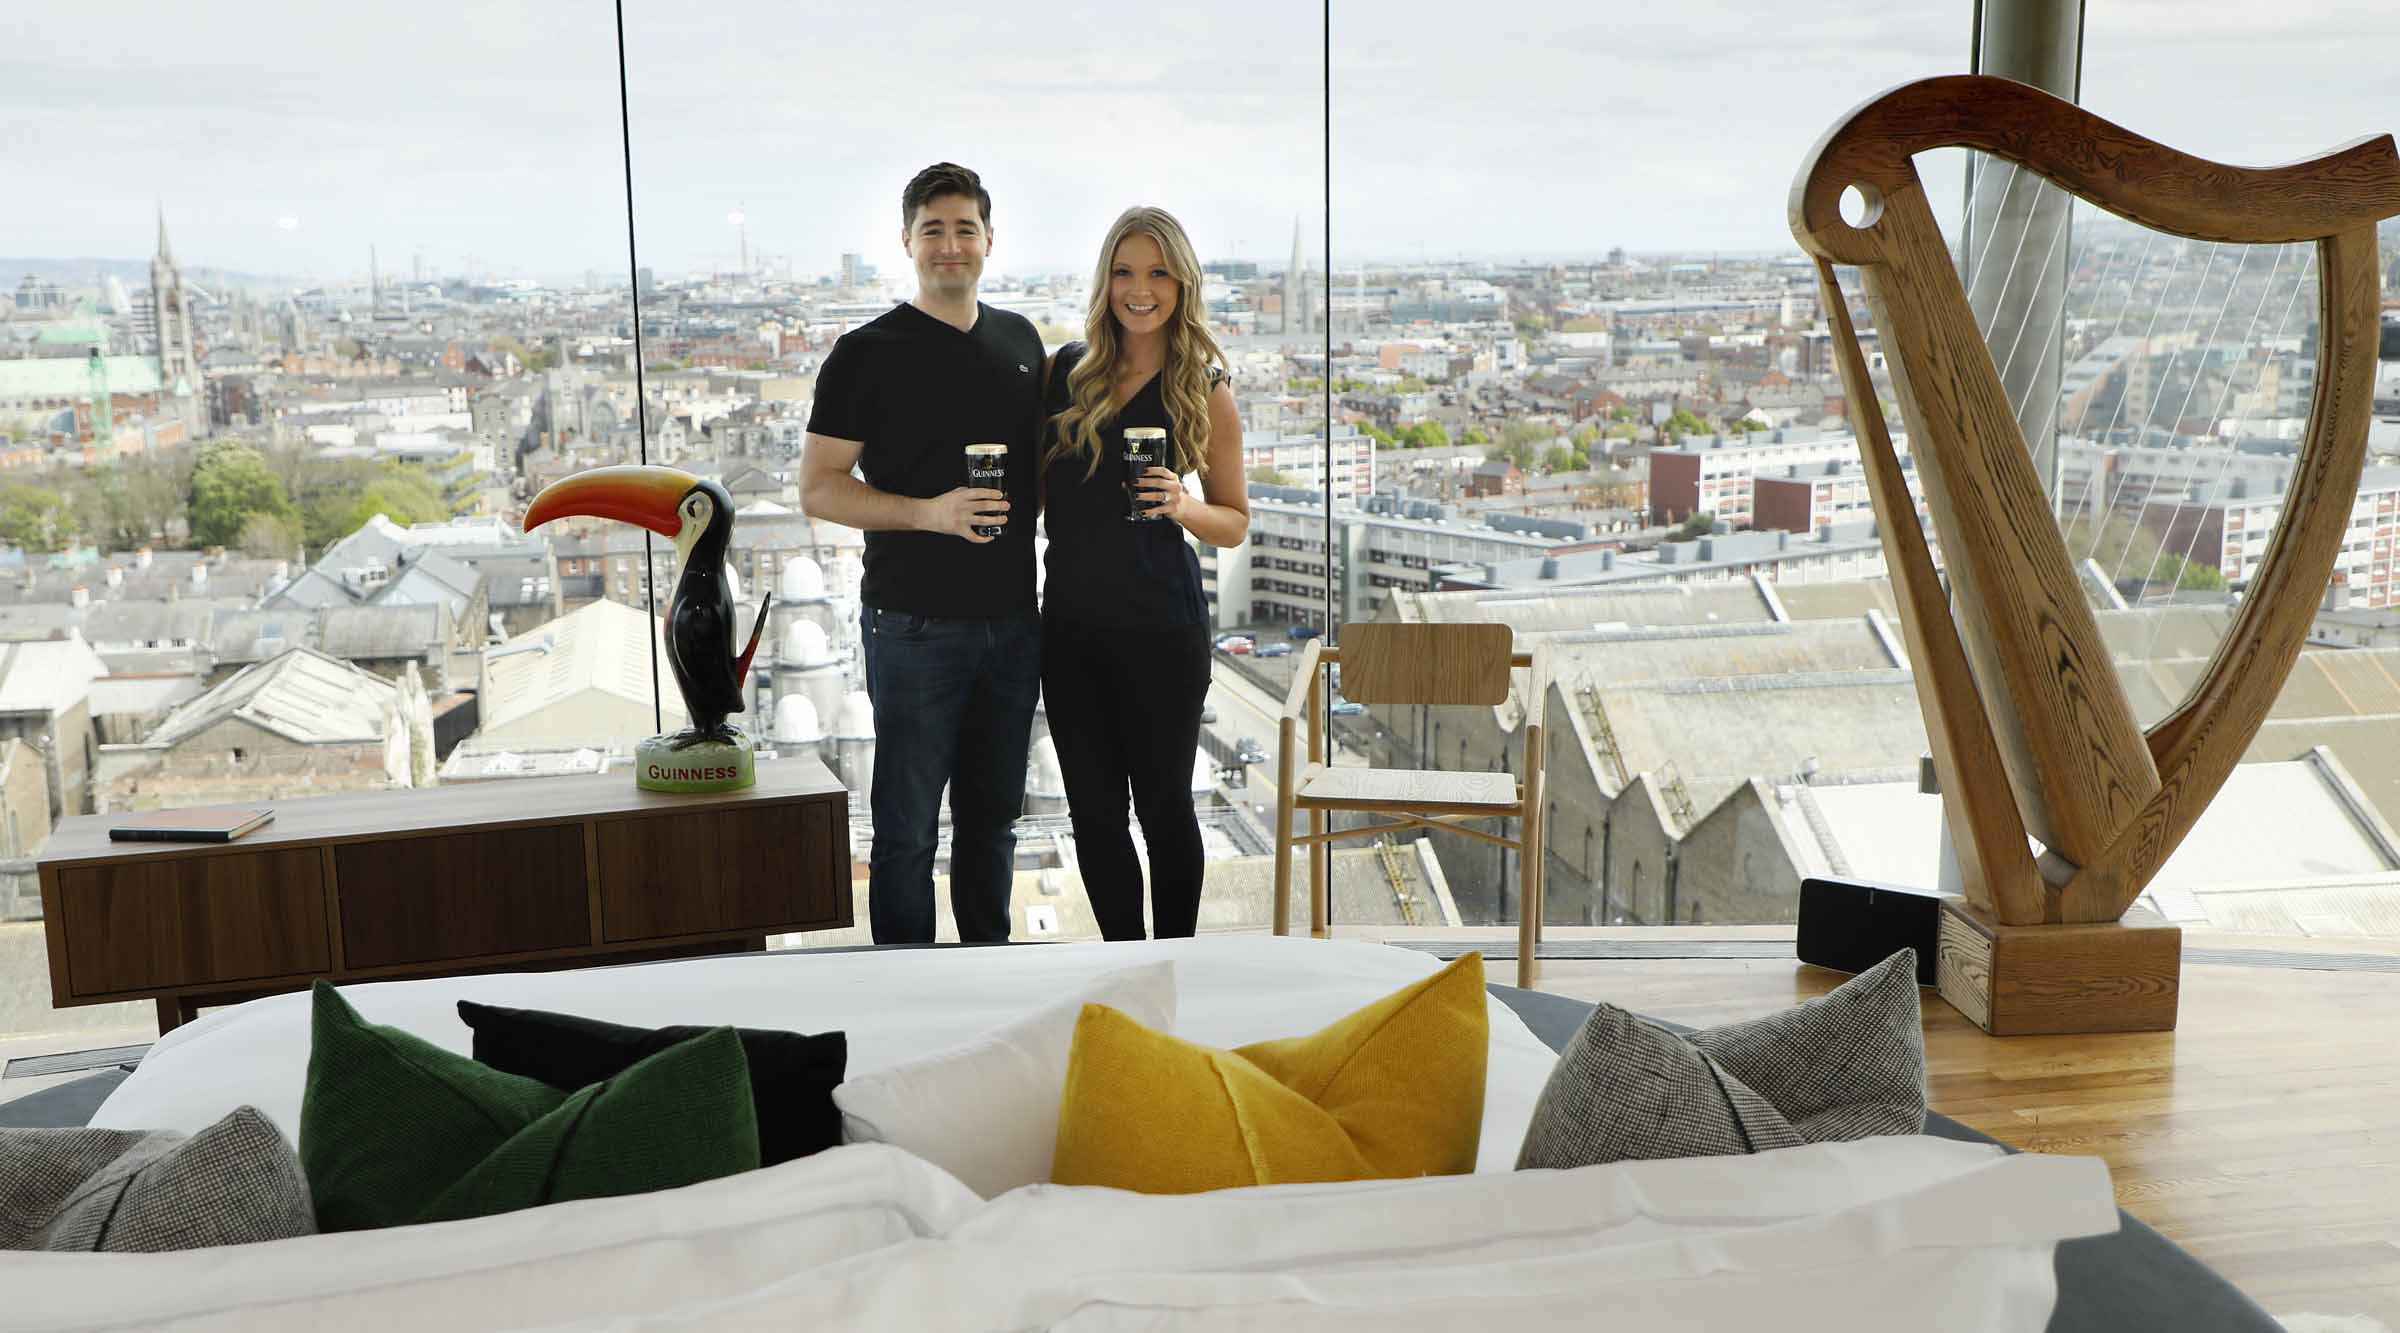 James and Kaitlin Morrissey from New York enjoy the 360 degree view from the Gravity Bar at the Guinness Storehouse, Dublin.